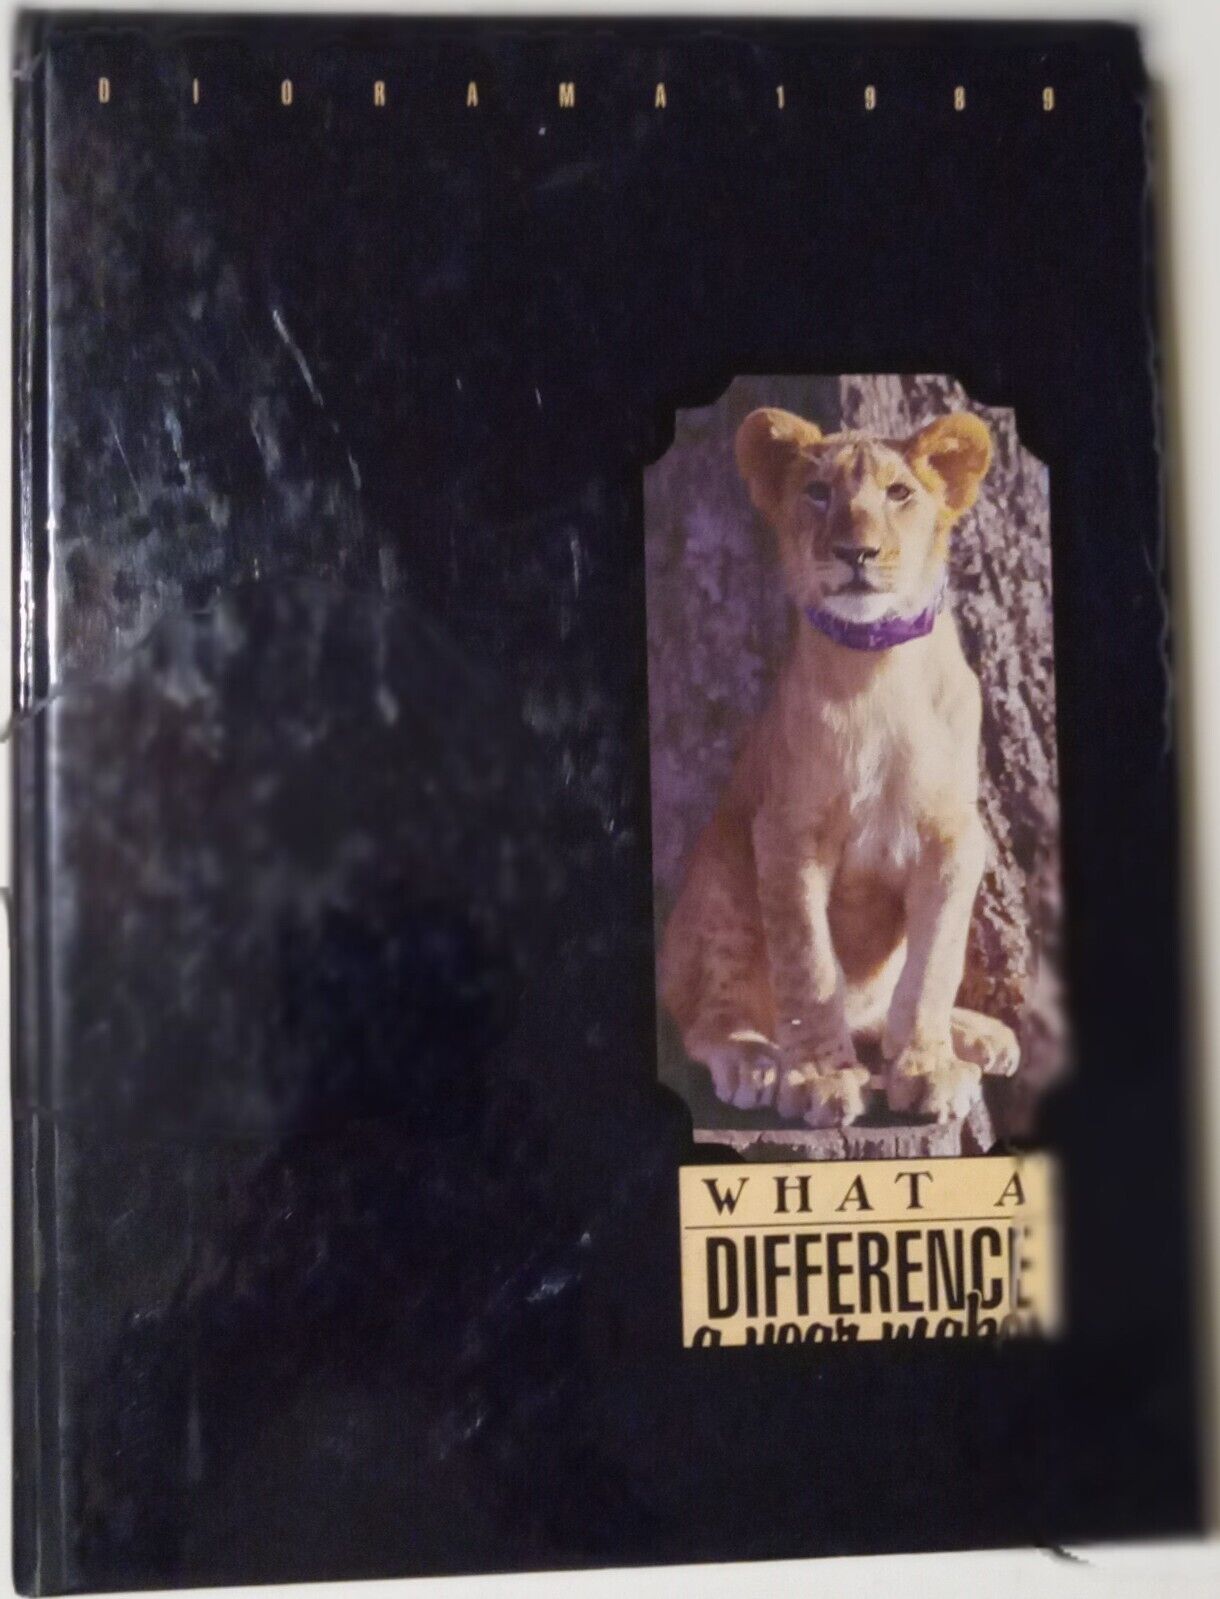 UNIVERSITY OF NORTH ALABAMA, FLORENCE AL, DIORAMA/ANNUAL/YEARBOOK 1989 GO LIONS